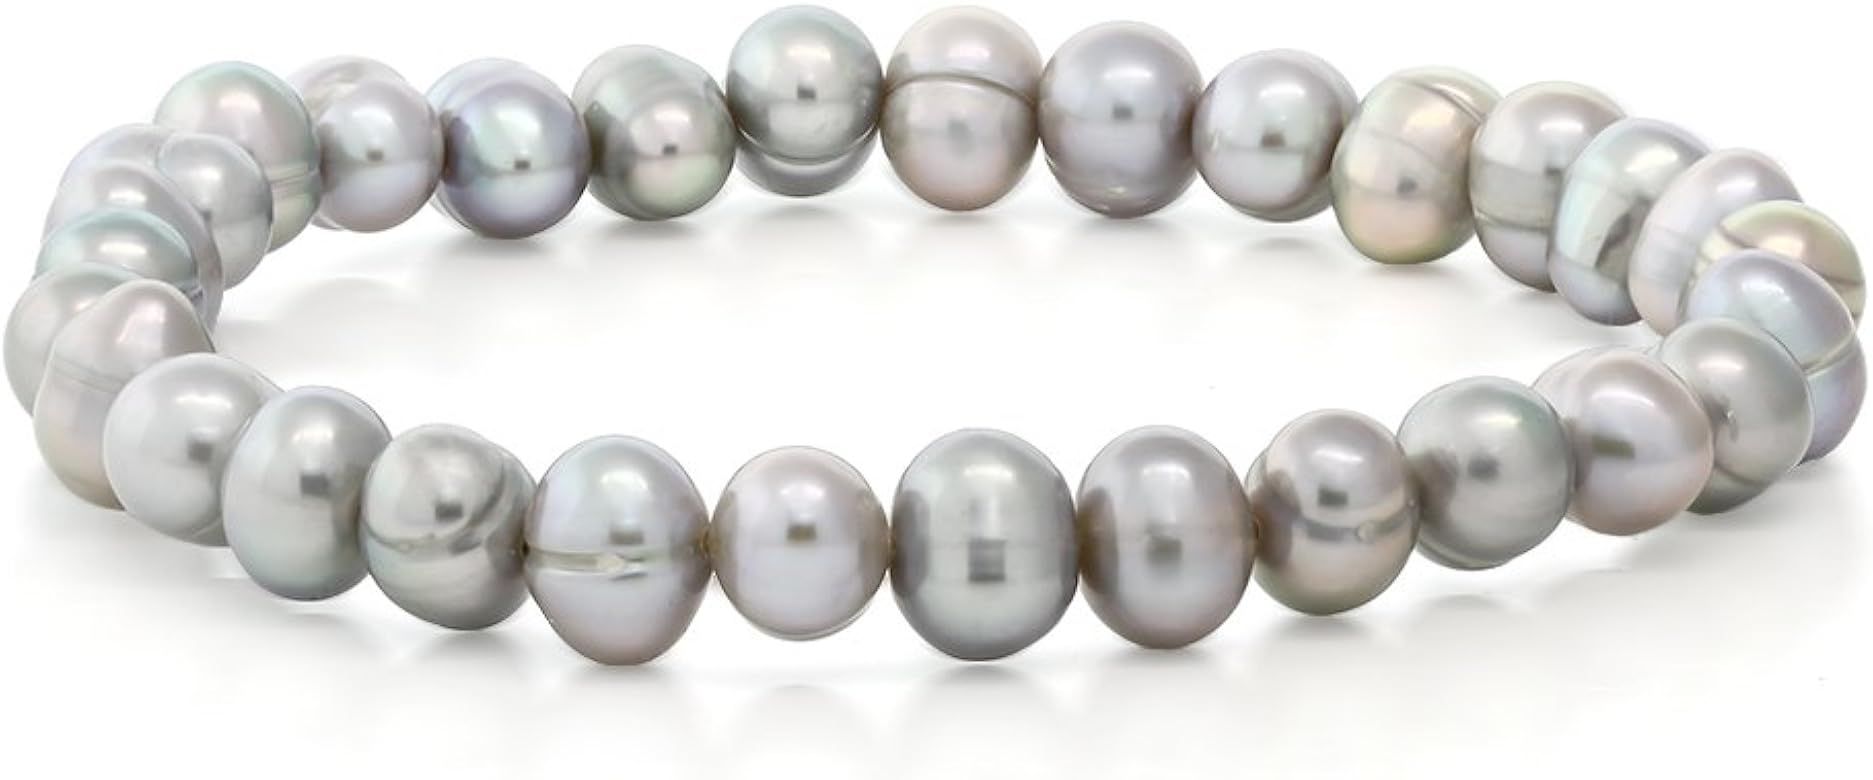 Gem Stone King Set Of 5 Multicolor Cultured Freshwater Pearl Stretch Bracelets 7.5inches | Amazon (US)